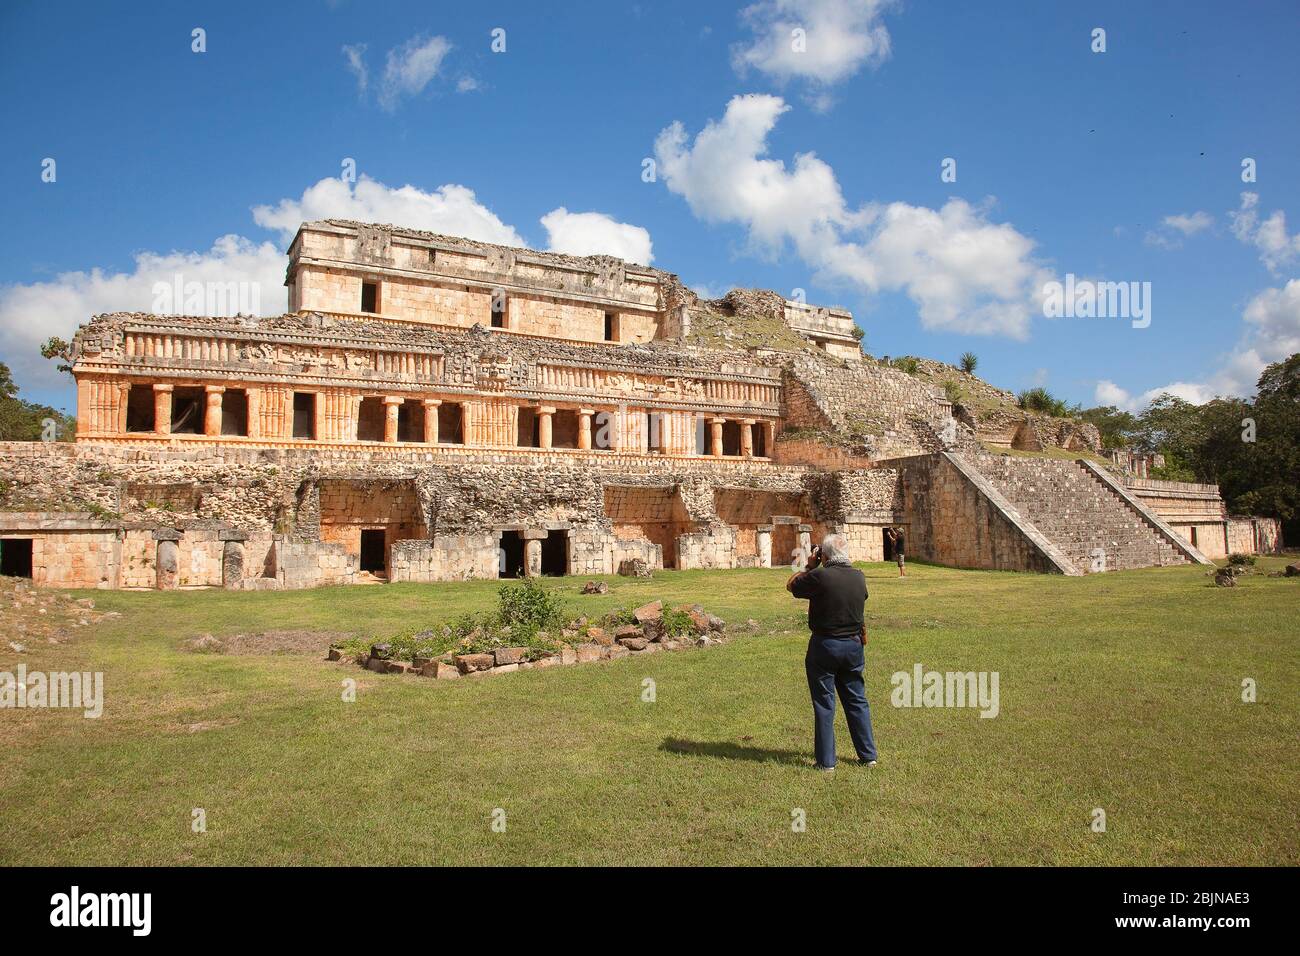 View to the Great Palace- Palacio Norte in Mayan Archaeological Site Sayil at the Puuc Route, Yucatan Province, Mexico, Central America Stock Photo